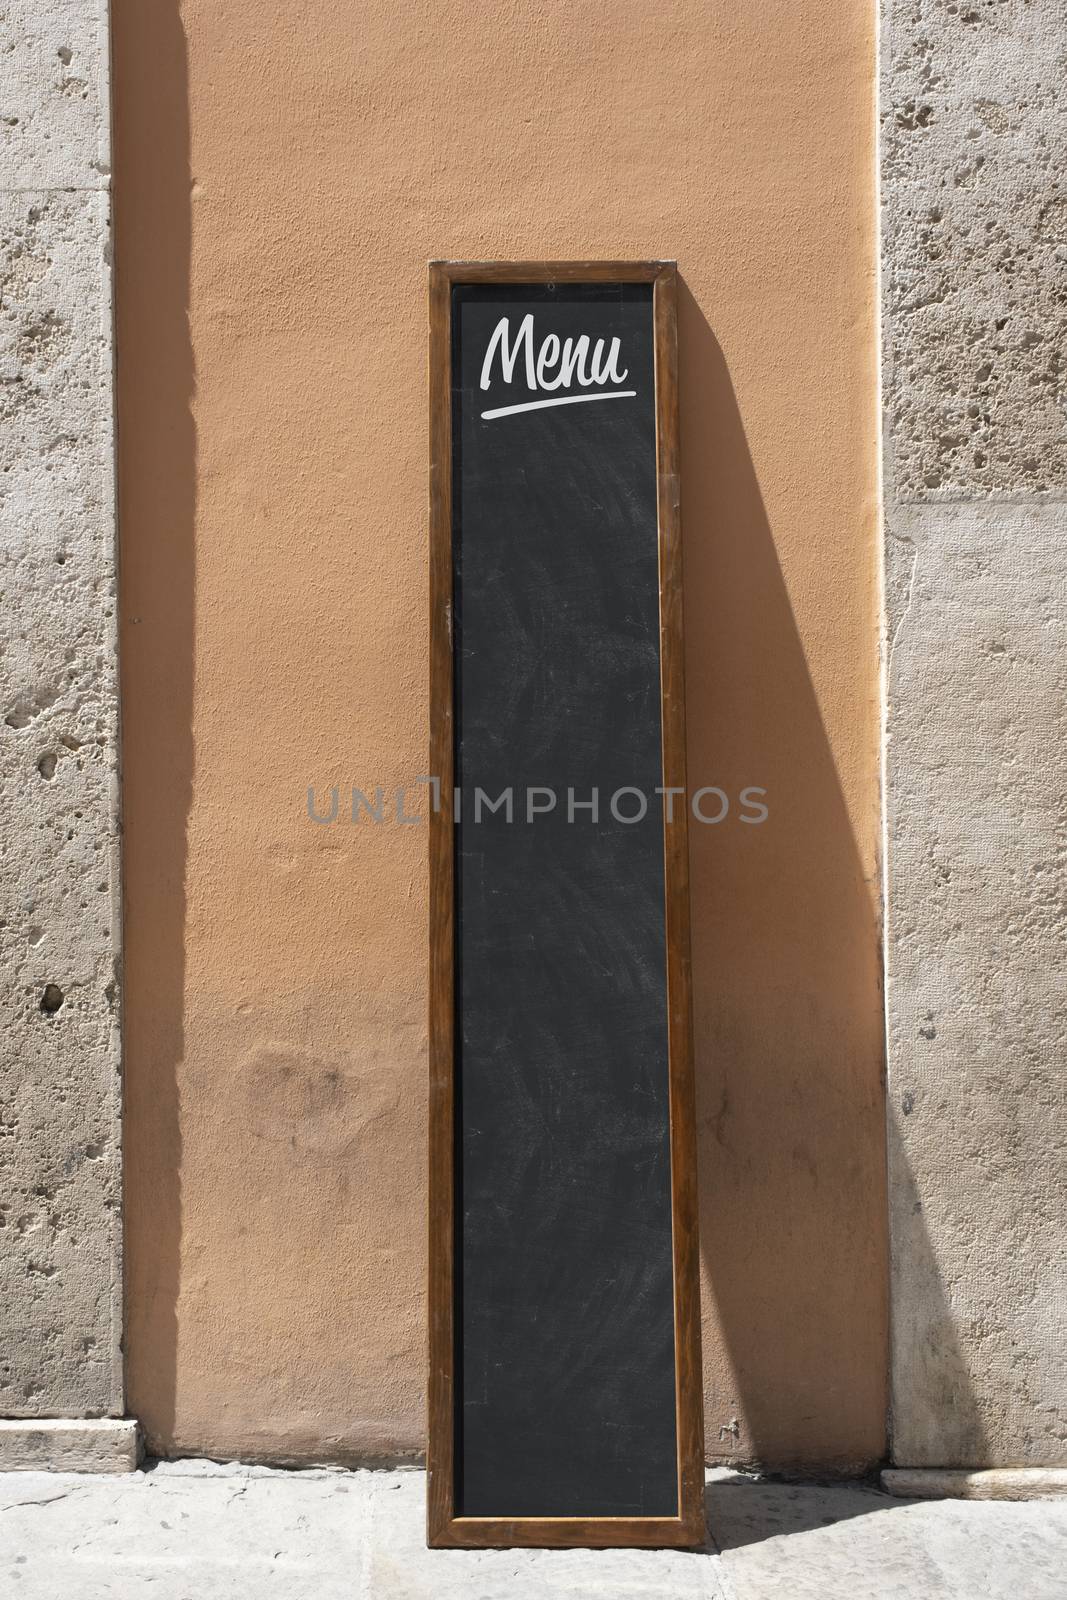 Empty menu board stand and outdoor cafe by Tjeerdkruse